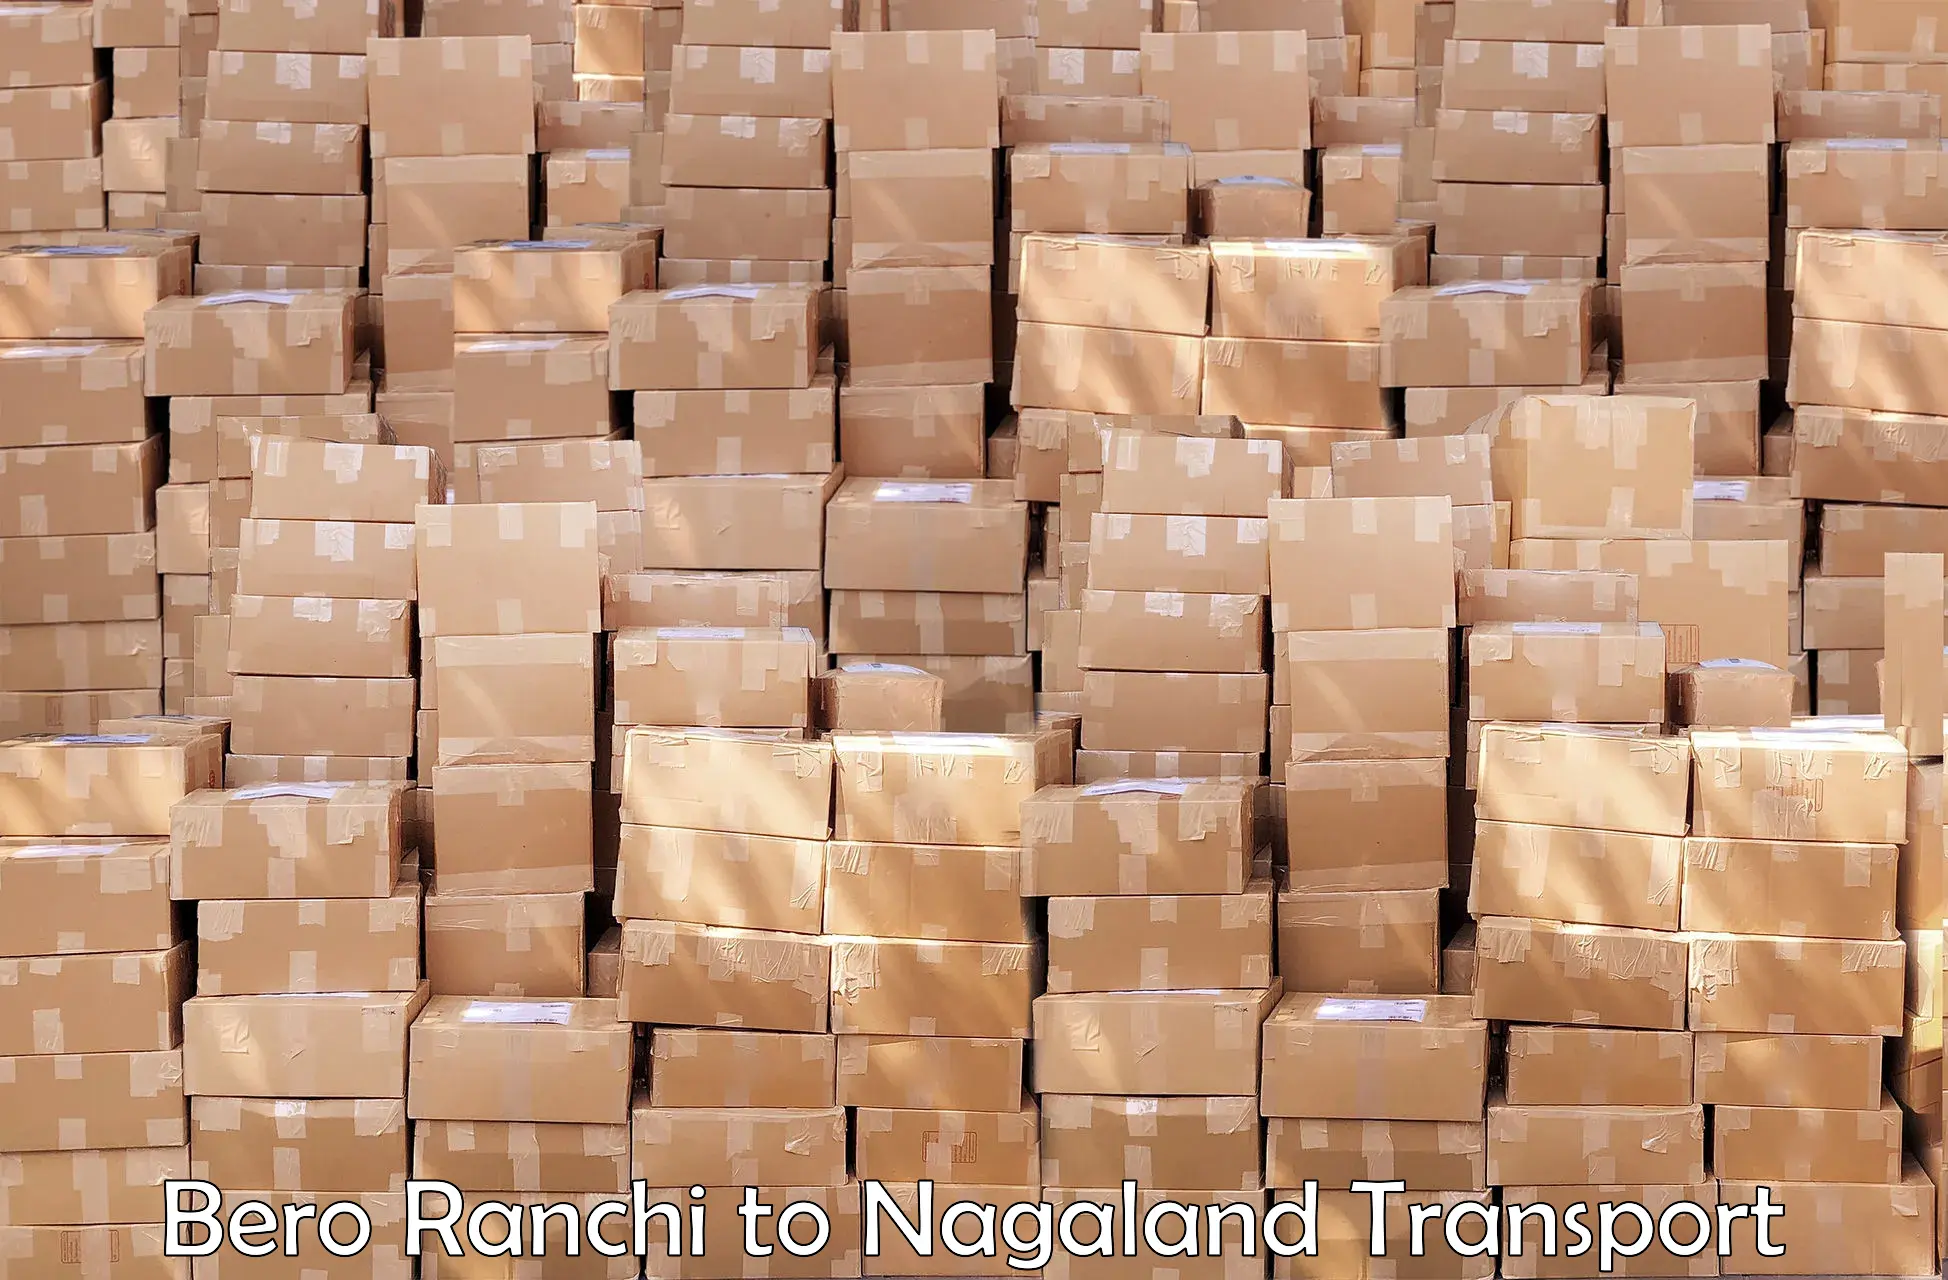 Daily parcel service transport in Bero Ranchi to Nagaland